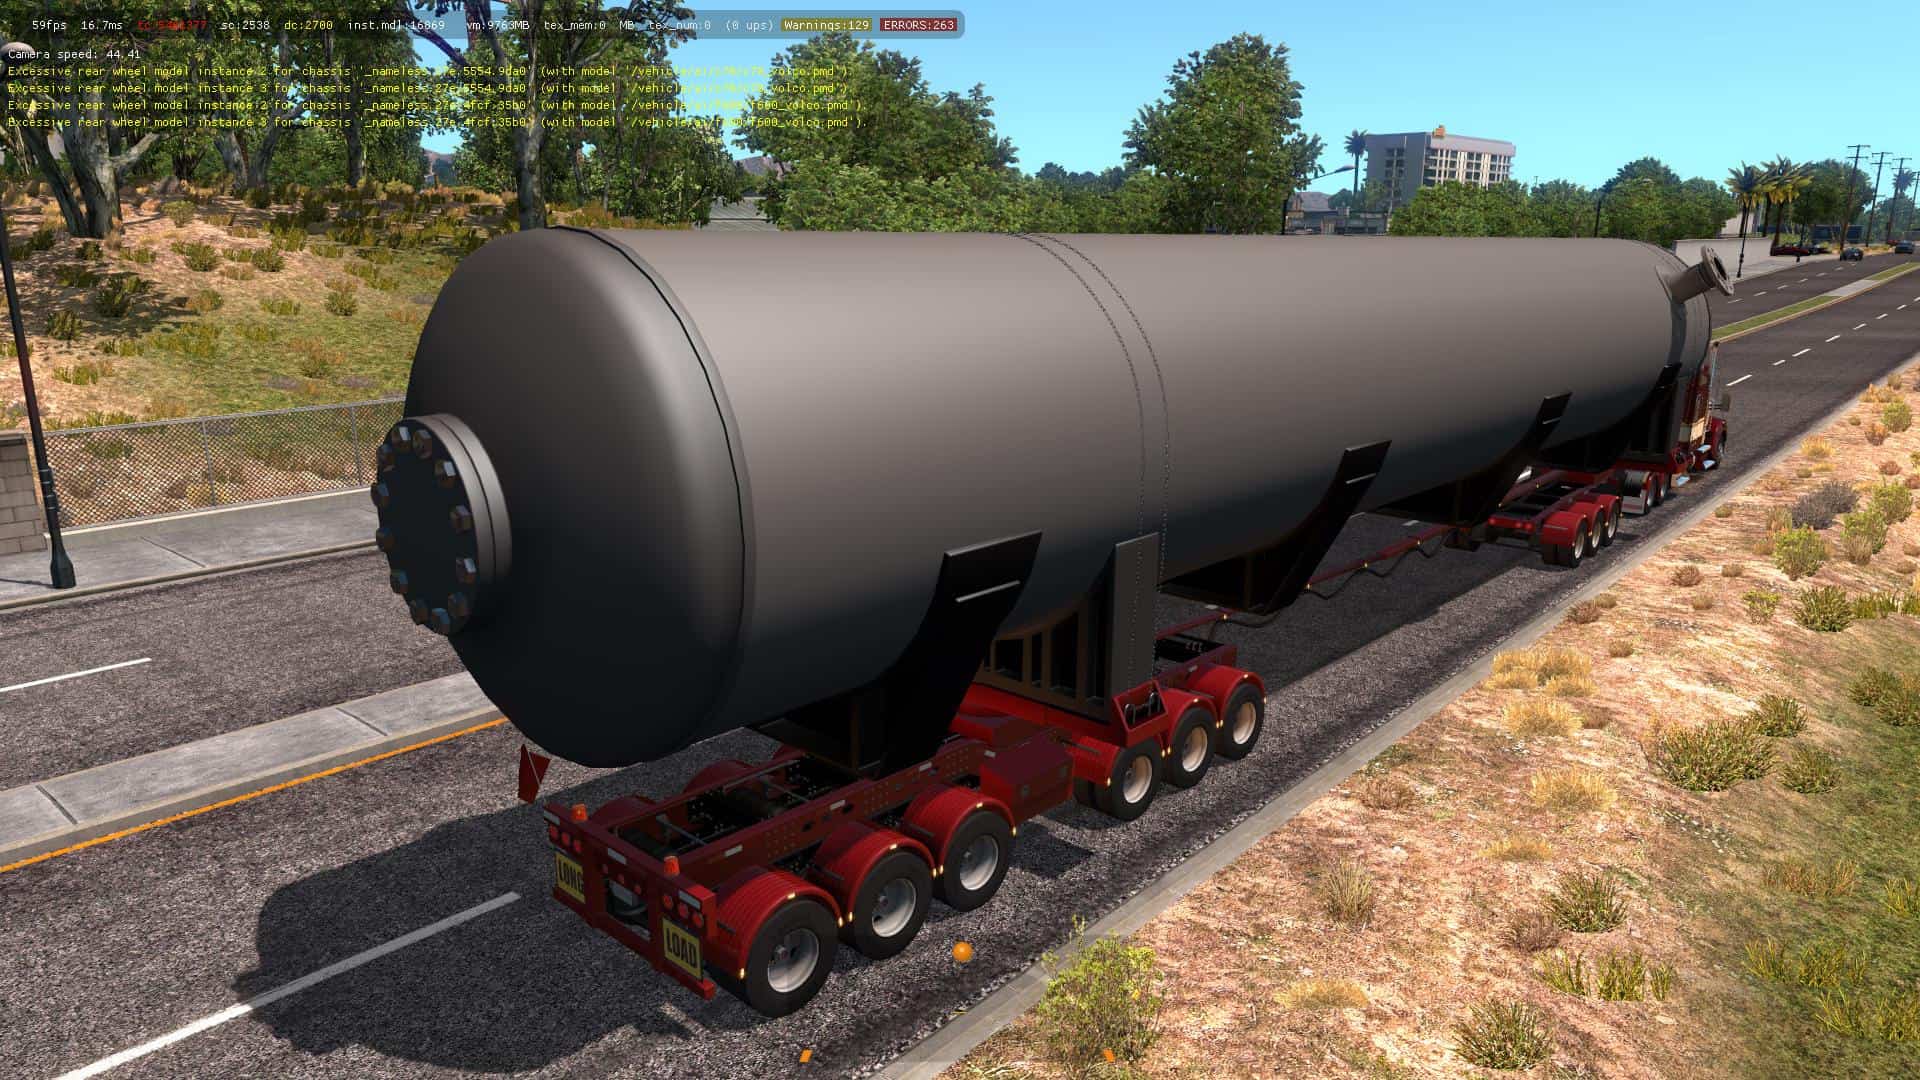 Steerable Dolly Ownable 1.36 Trailer - American Truck Simulator mod ...